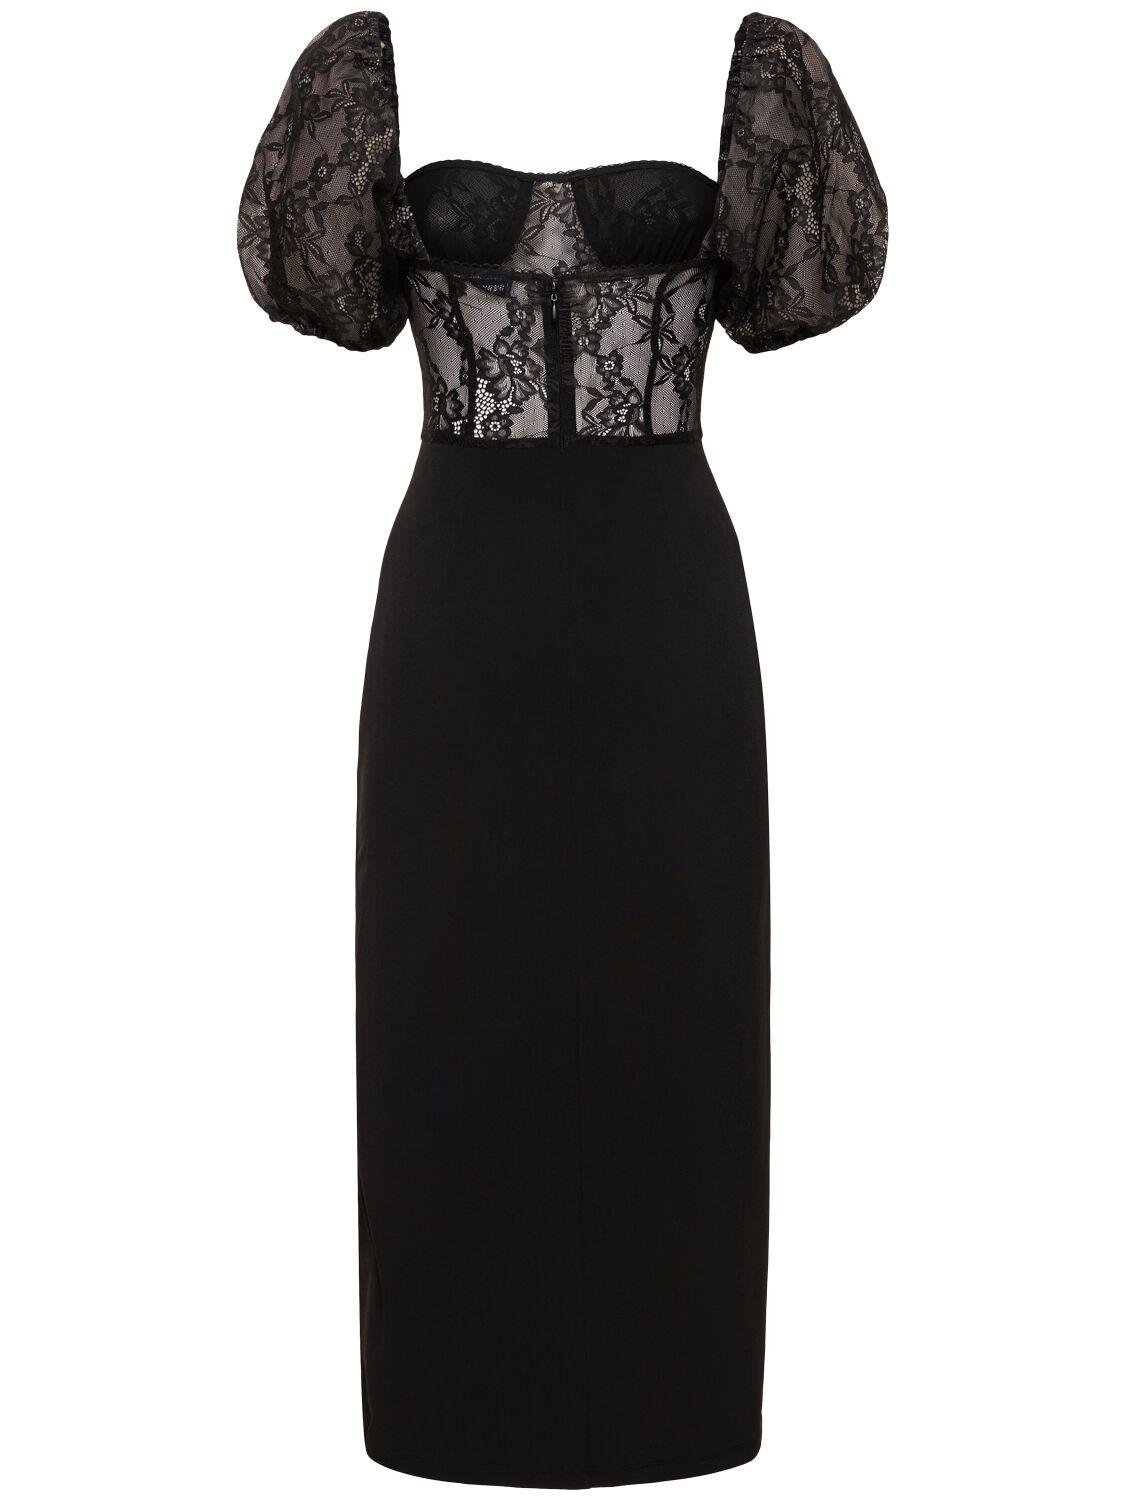 Lace Midi Corset Dress by WEWOREWHAT